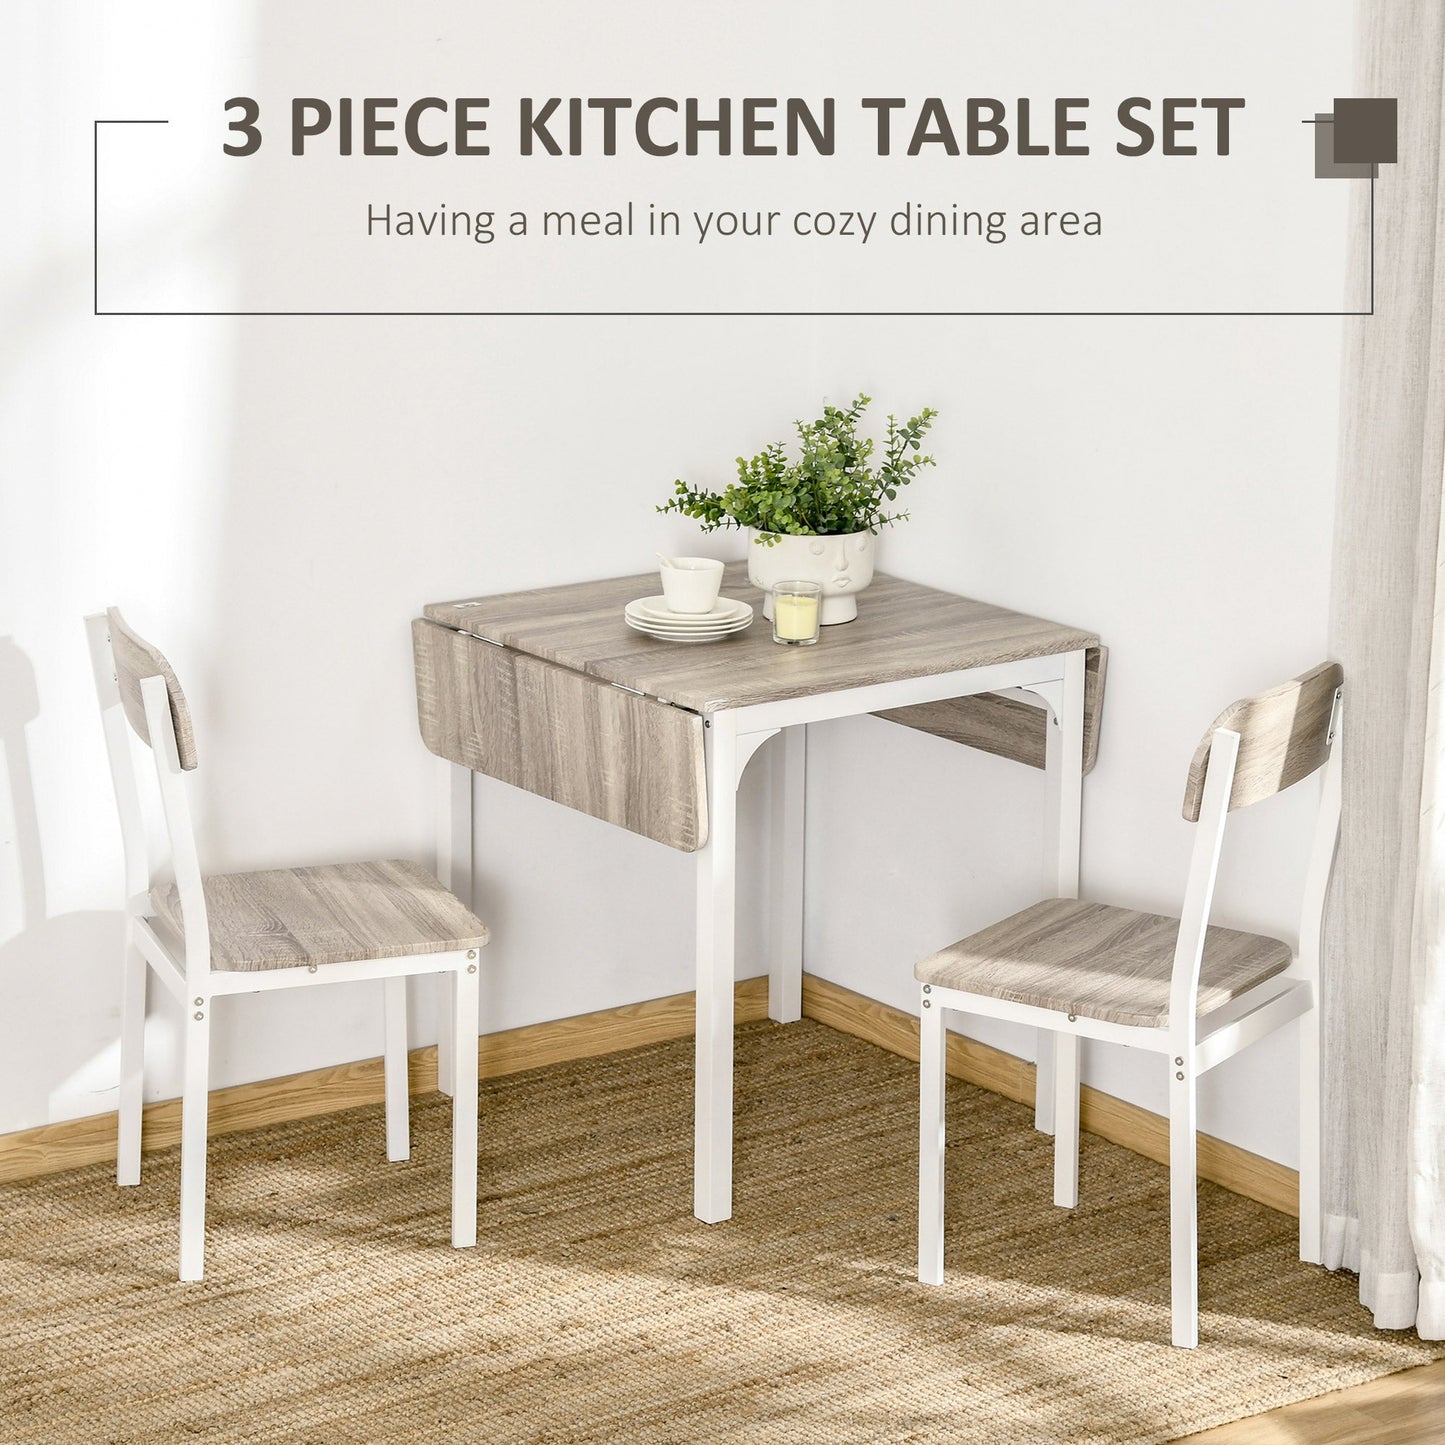 Foldable Dining Table Set for 2, Drop-Leaf Kitchen Table with 2 Chairs for Apartments, Studios, Natural Drop-leaf Dining Table Set Includes 2 Chairs at Gallery Canada